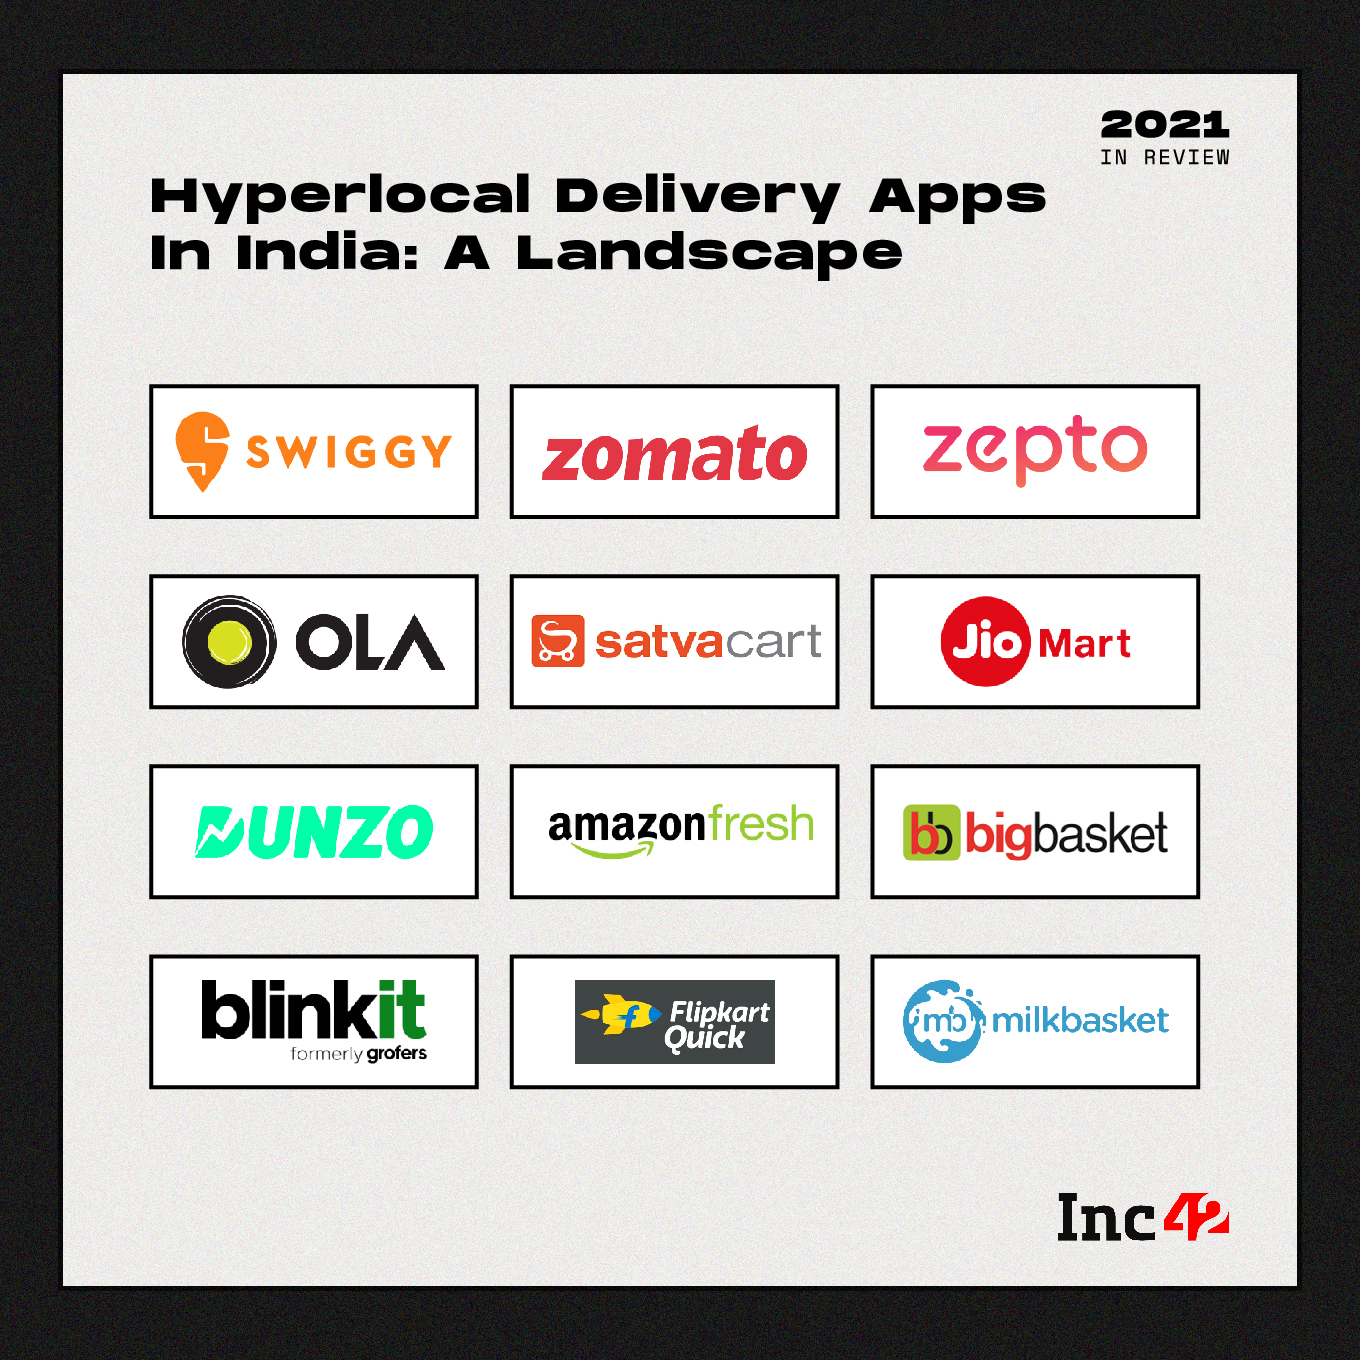 Hyperlocal delivery apps